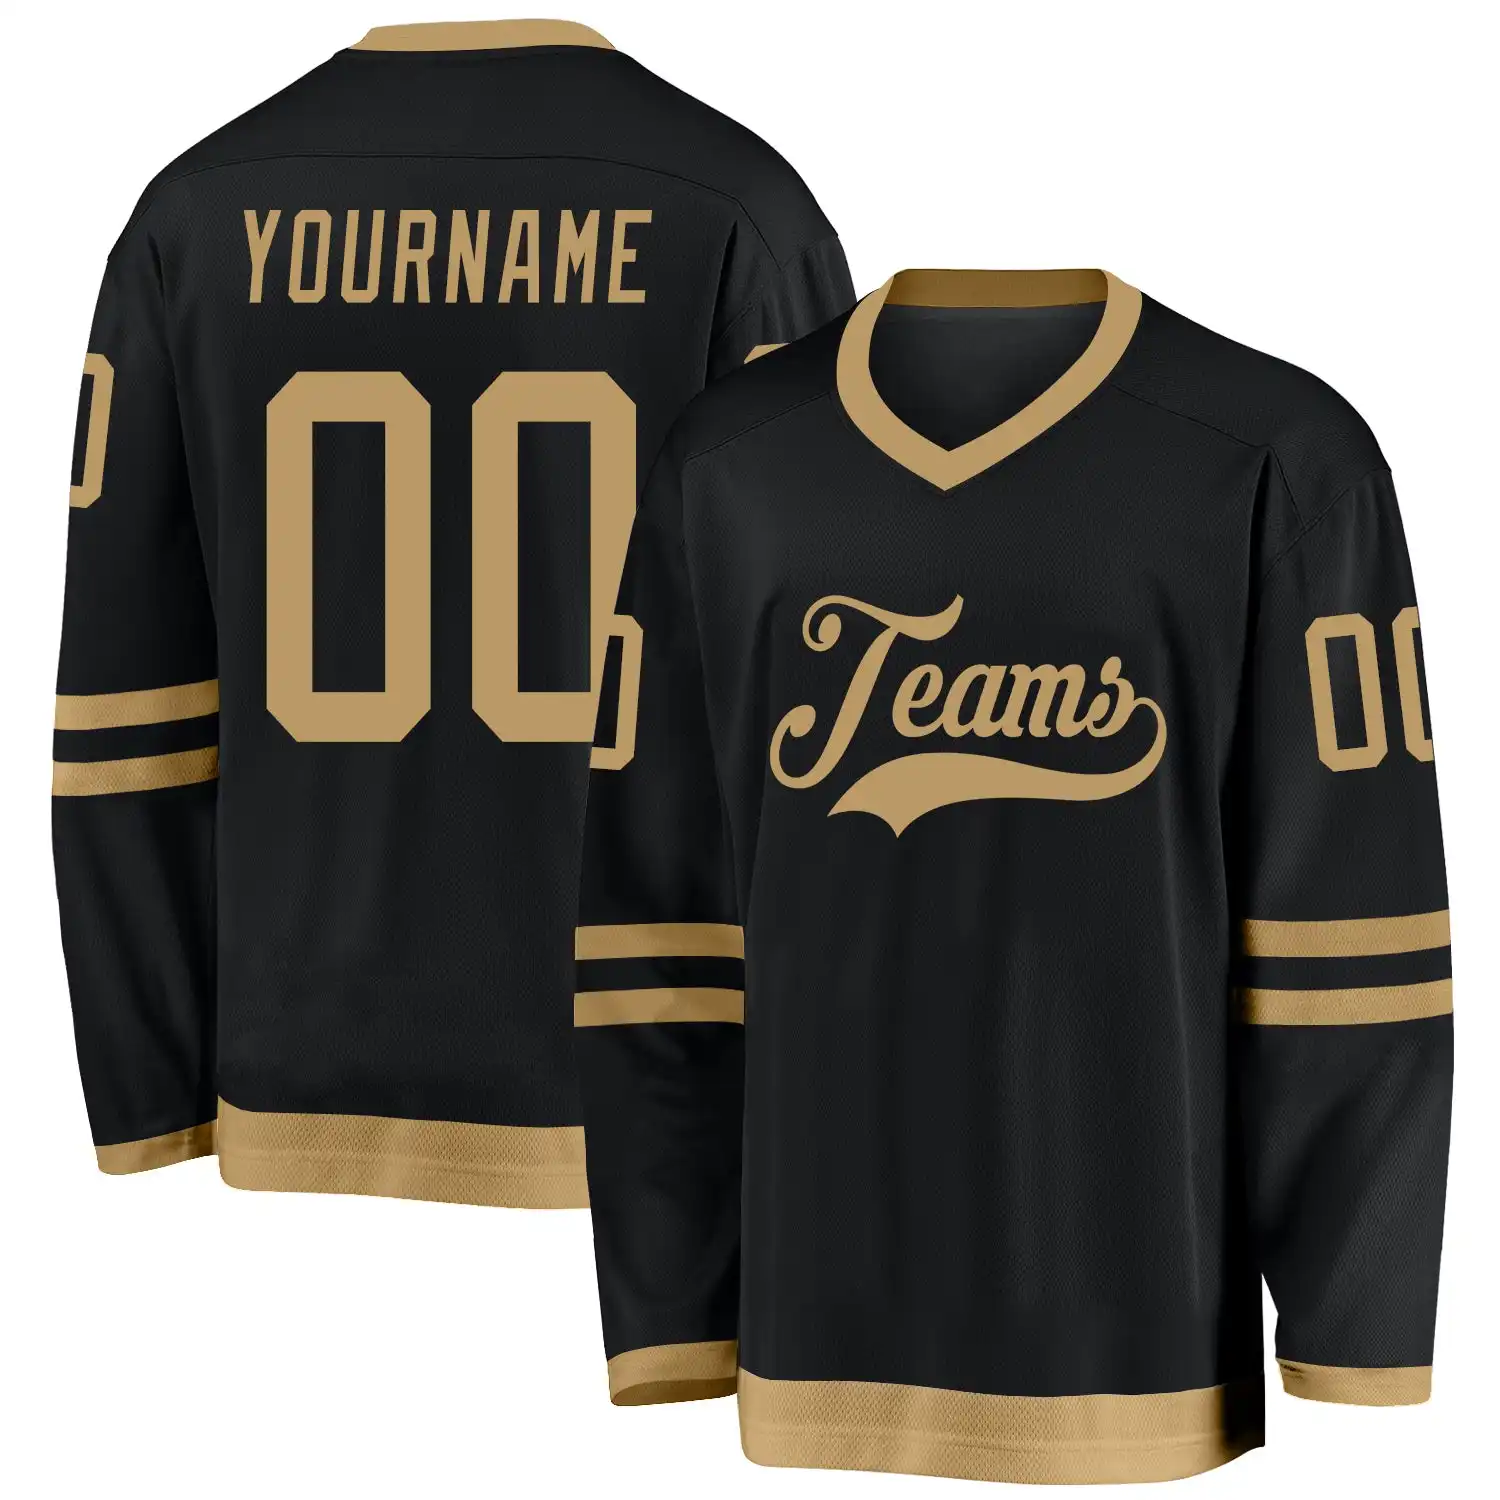 Stitched And Print Black Old Gold Hockey Jersey Custom